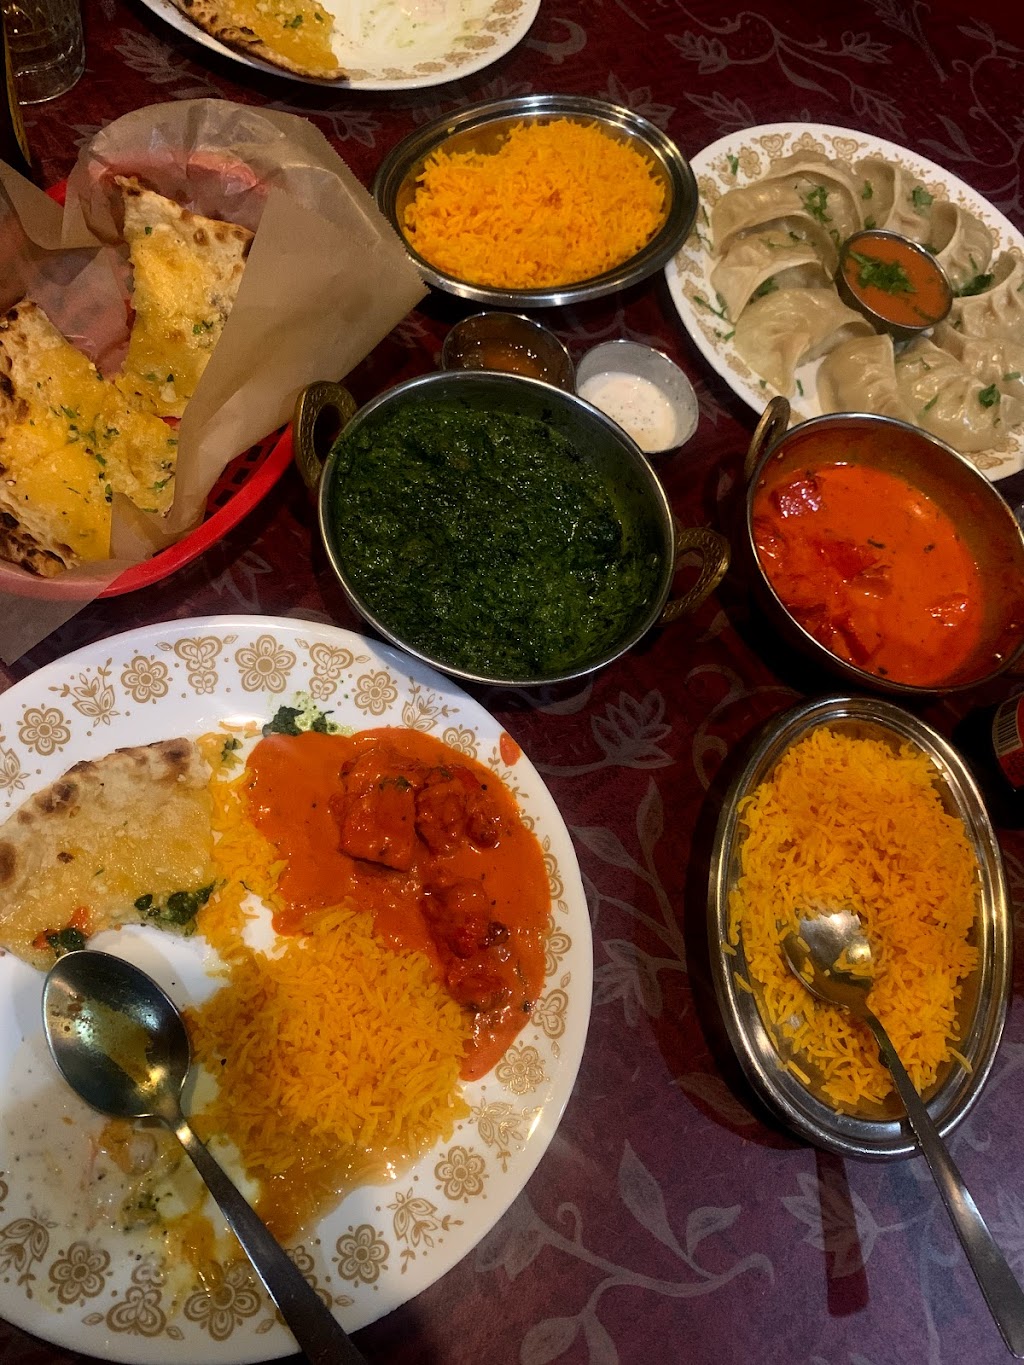 India Nepal Oven | 9126 W Bowles Ave Ste 1B, Littleton, CO 80123, USA | Phone: (303) 933-2829